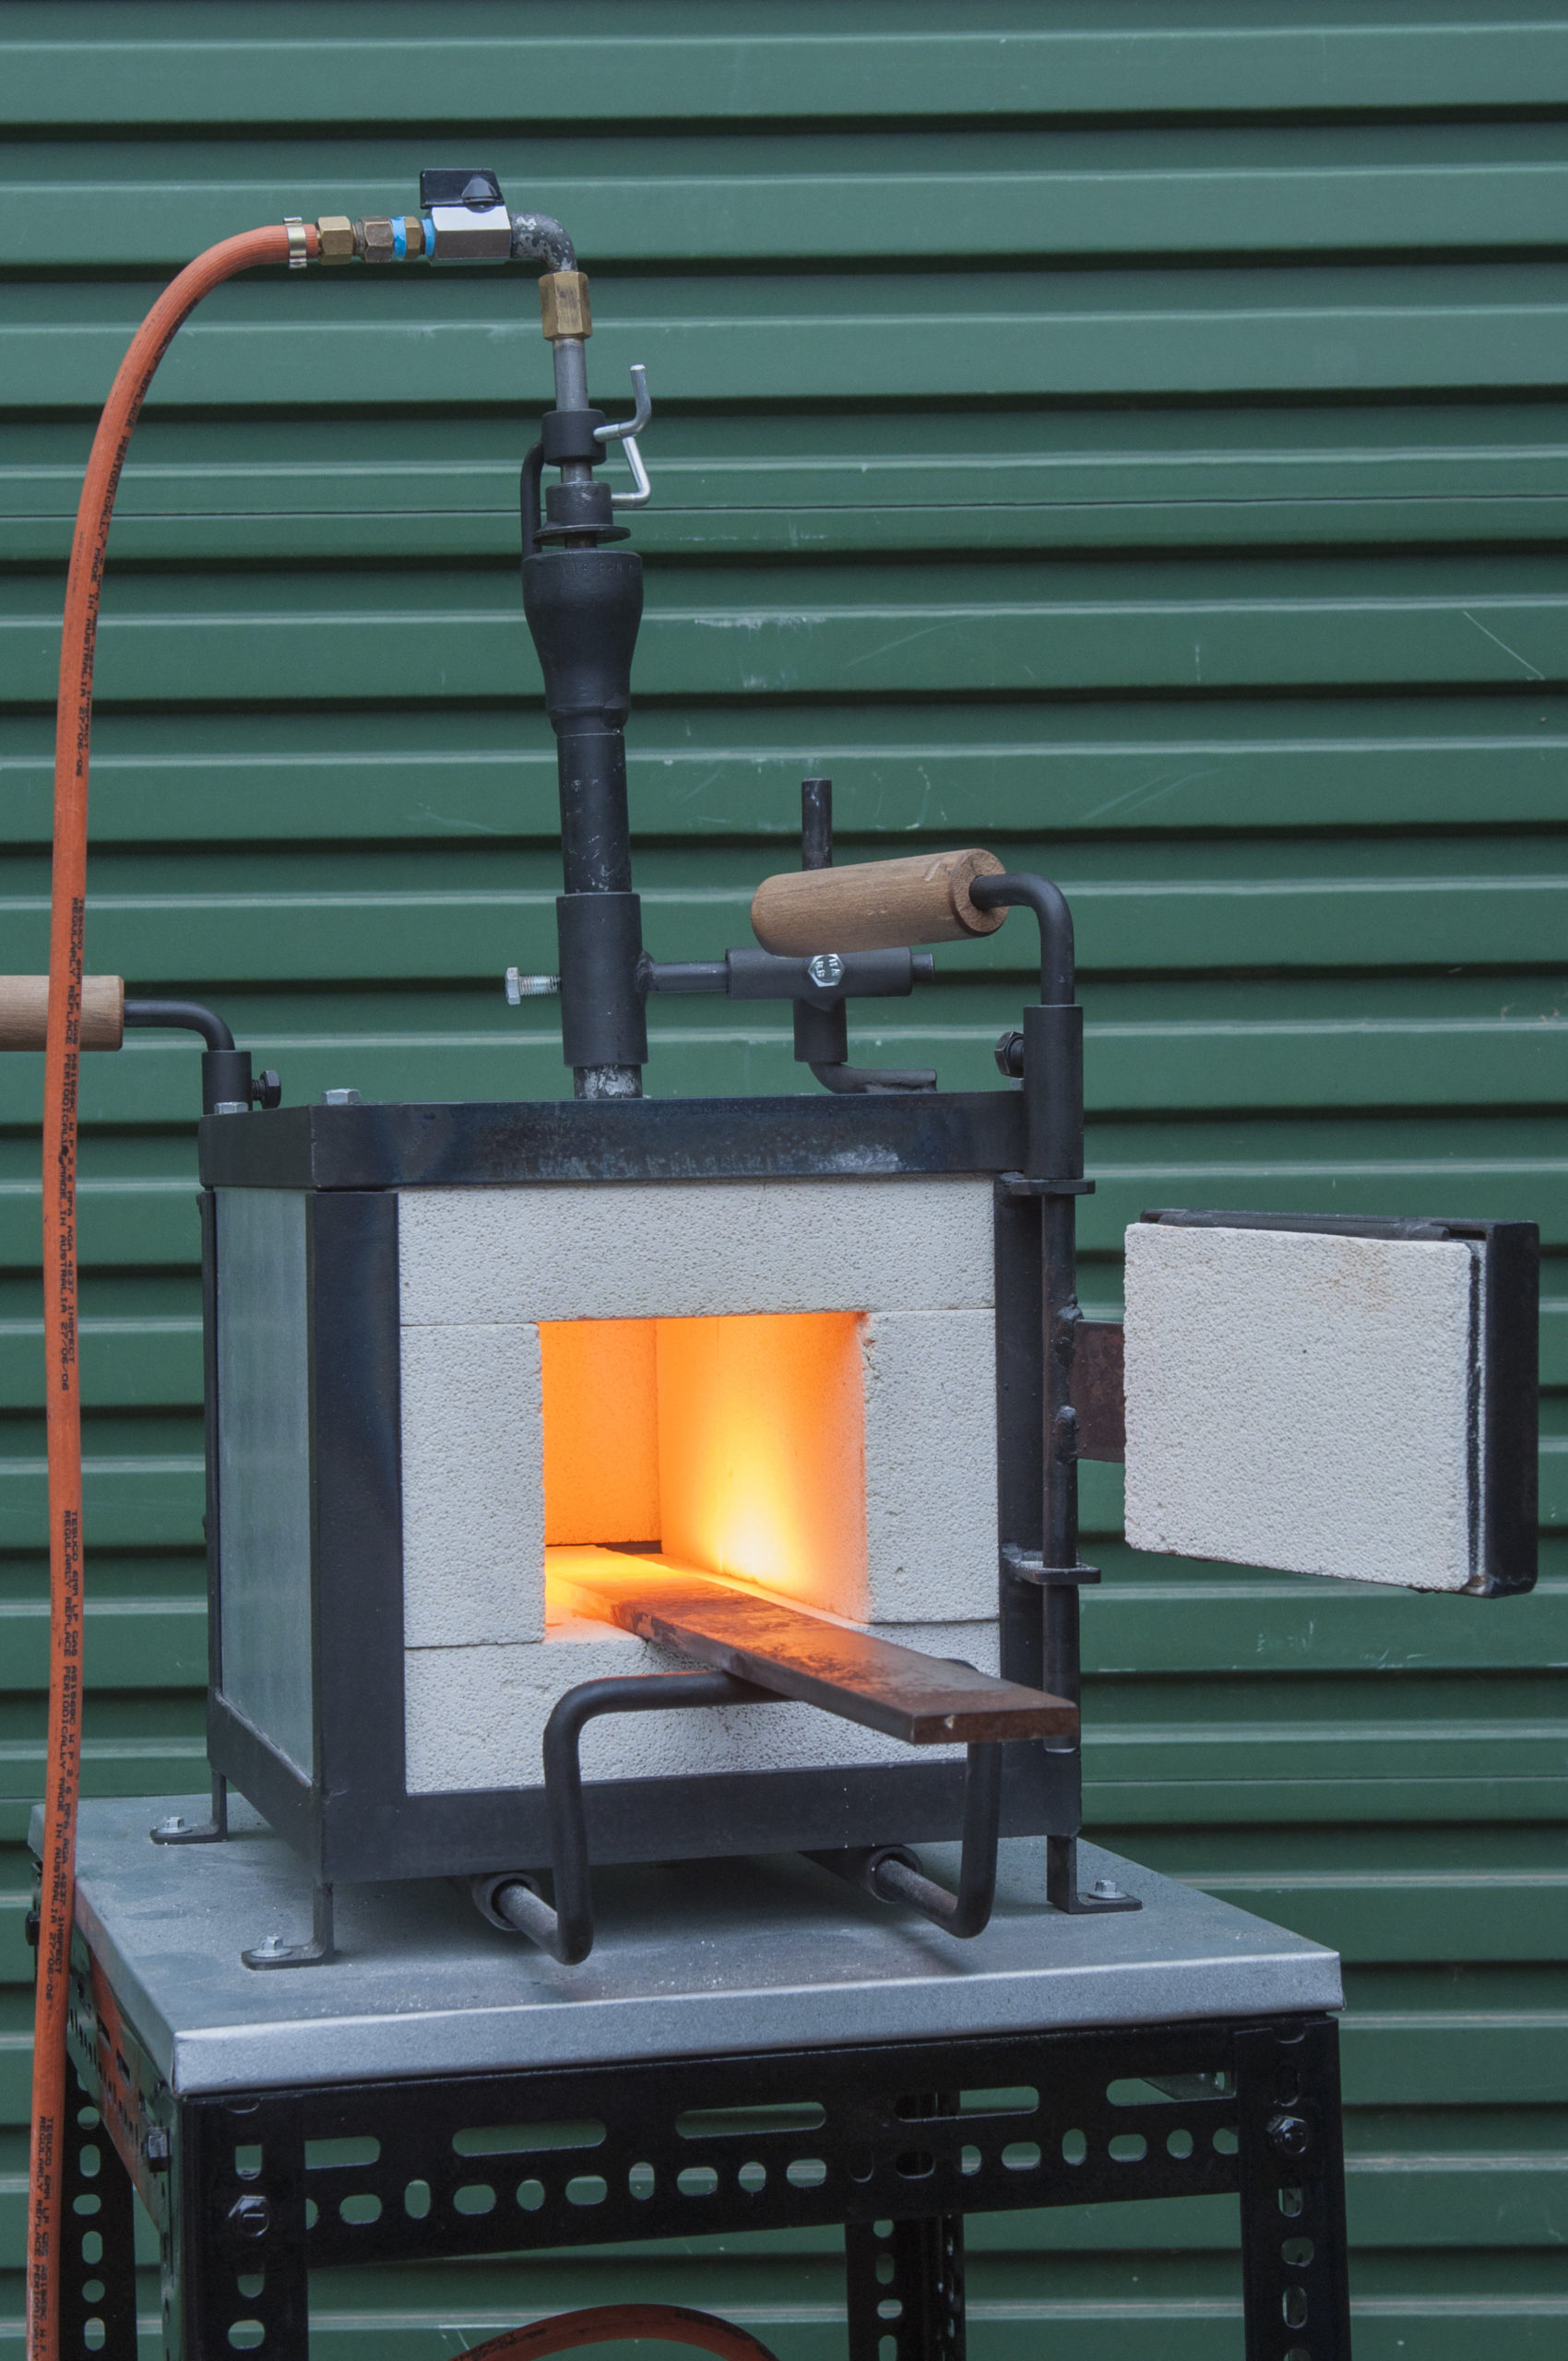 The Shed - gas-powered forge